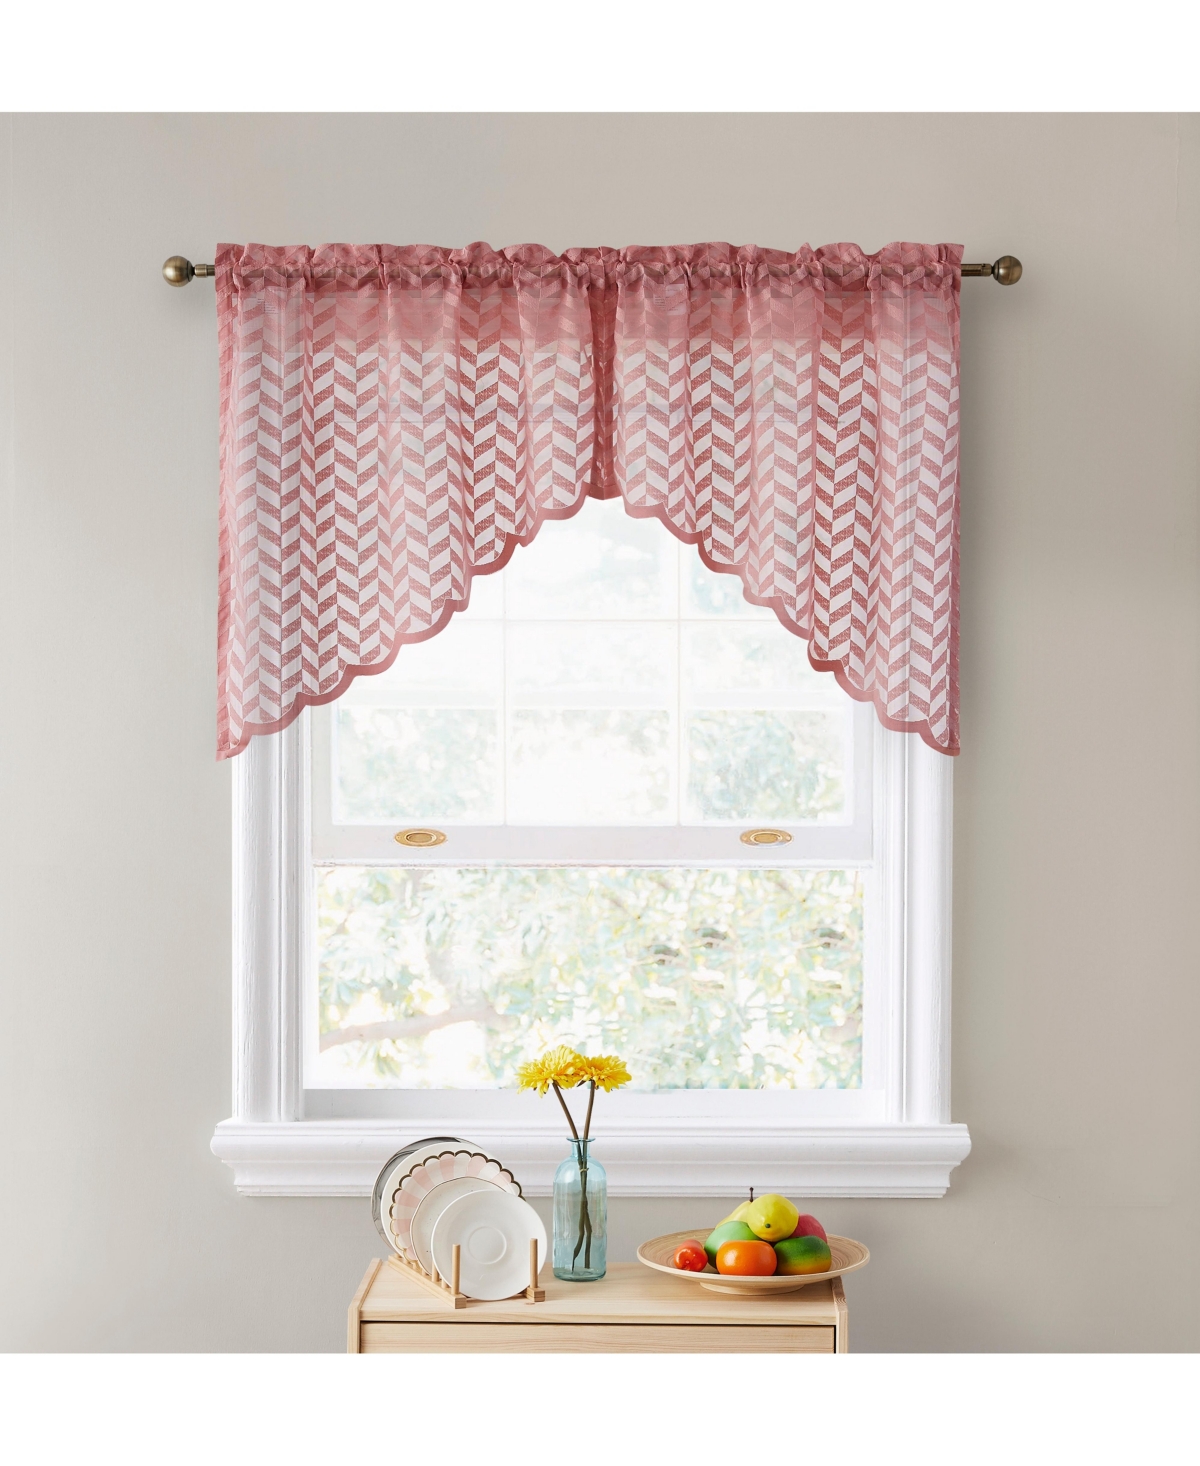 Herringbone Semi Sheer Voile Kitchen Cafe Curtain Panels - Rod Pocket -Swags for Small Windows & Bathroom - Blush pink